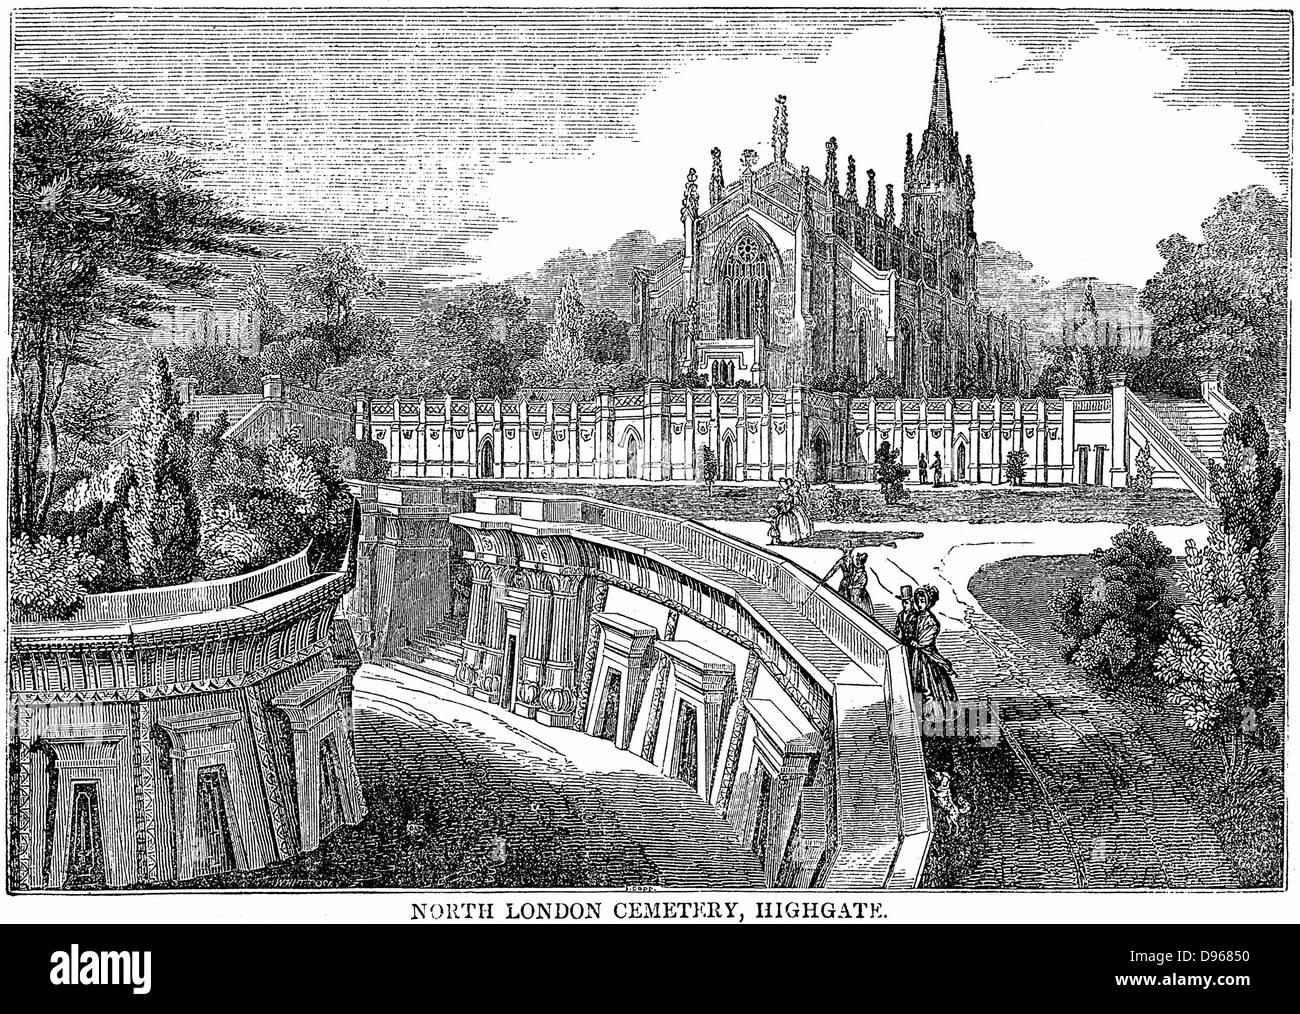 North London Cemetery, Highgate. The Lebanon Catacombs, terrace and sepulchres built in the Egyptian architectural style popular at this time. Wood engraving 1838. Stock Photo